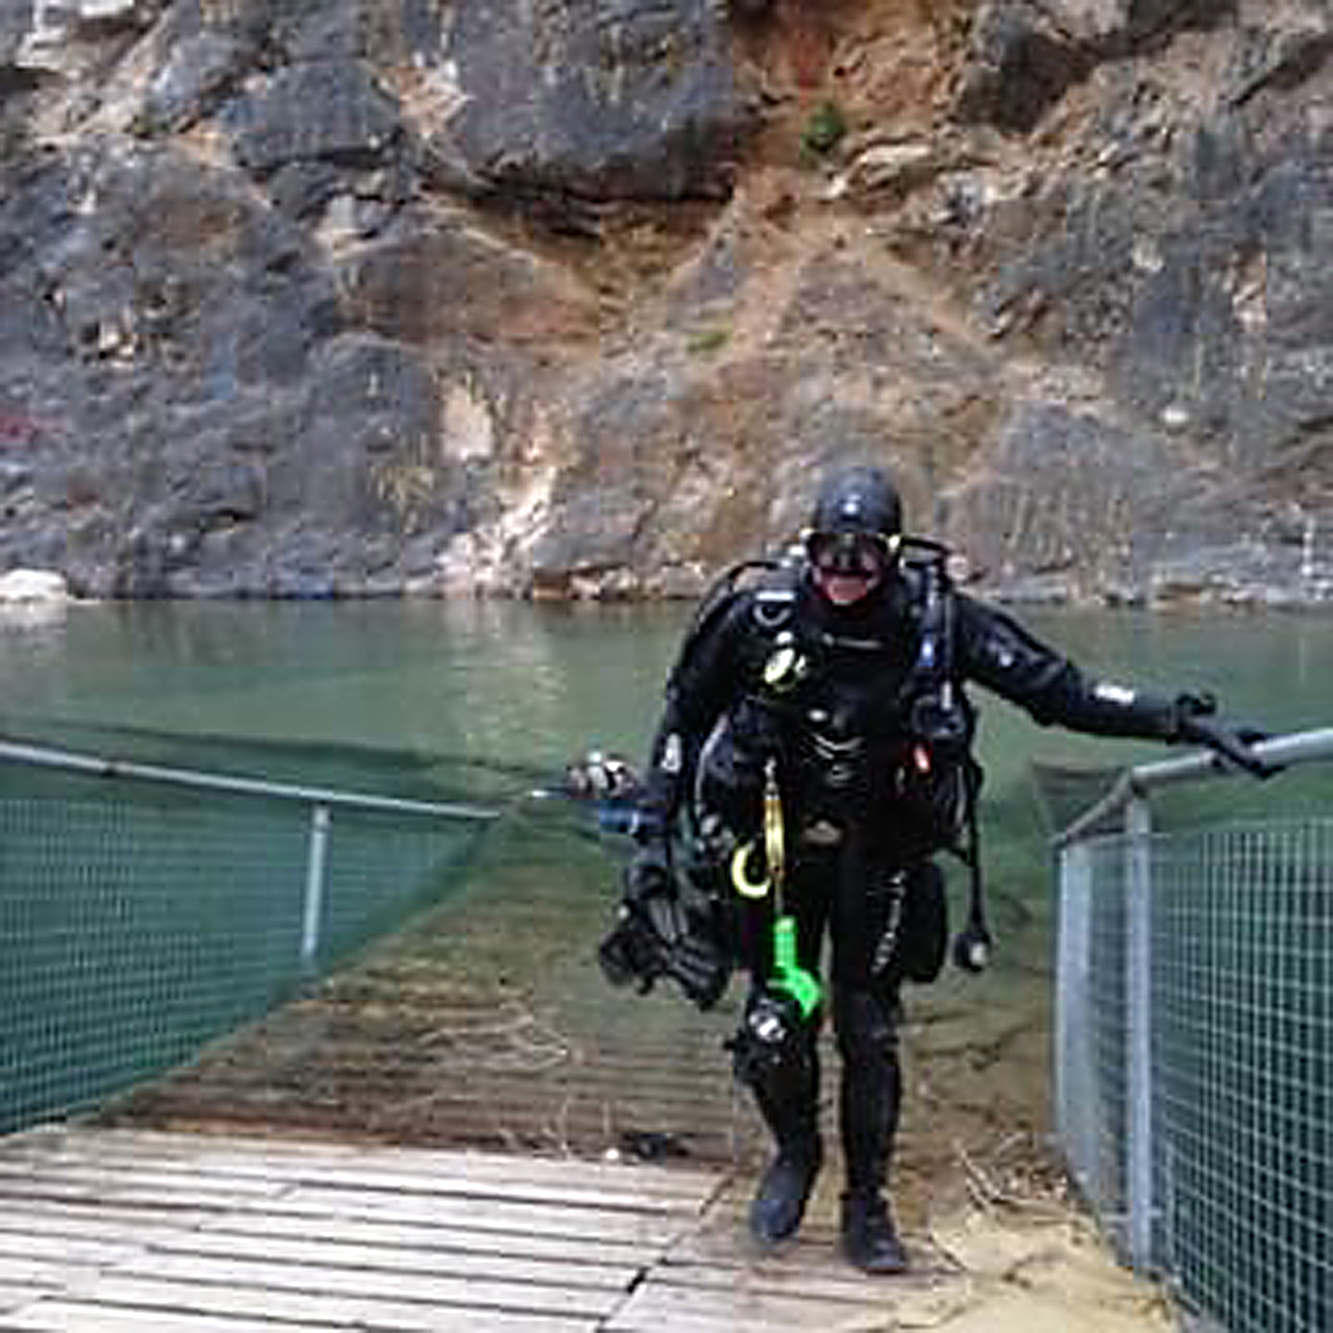 Low res image of Mr Coates in his diving gear